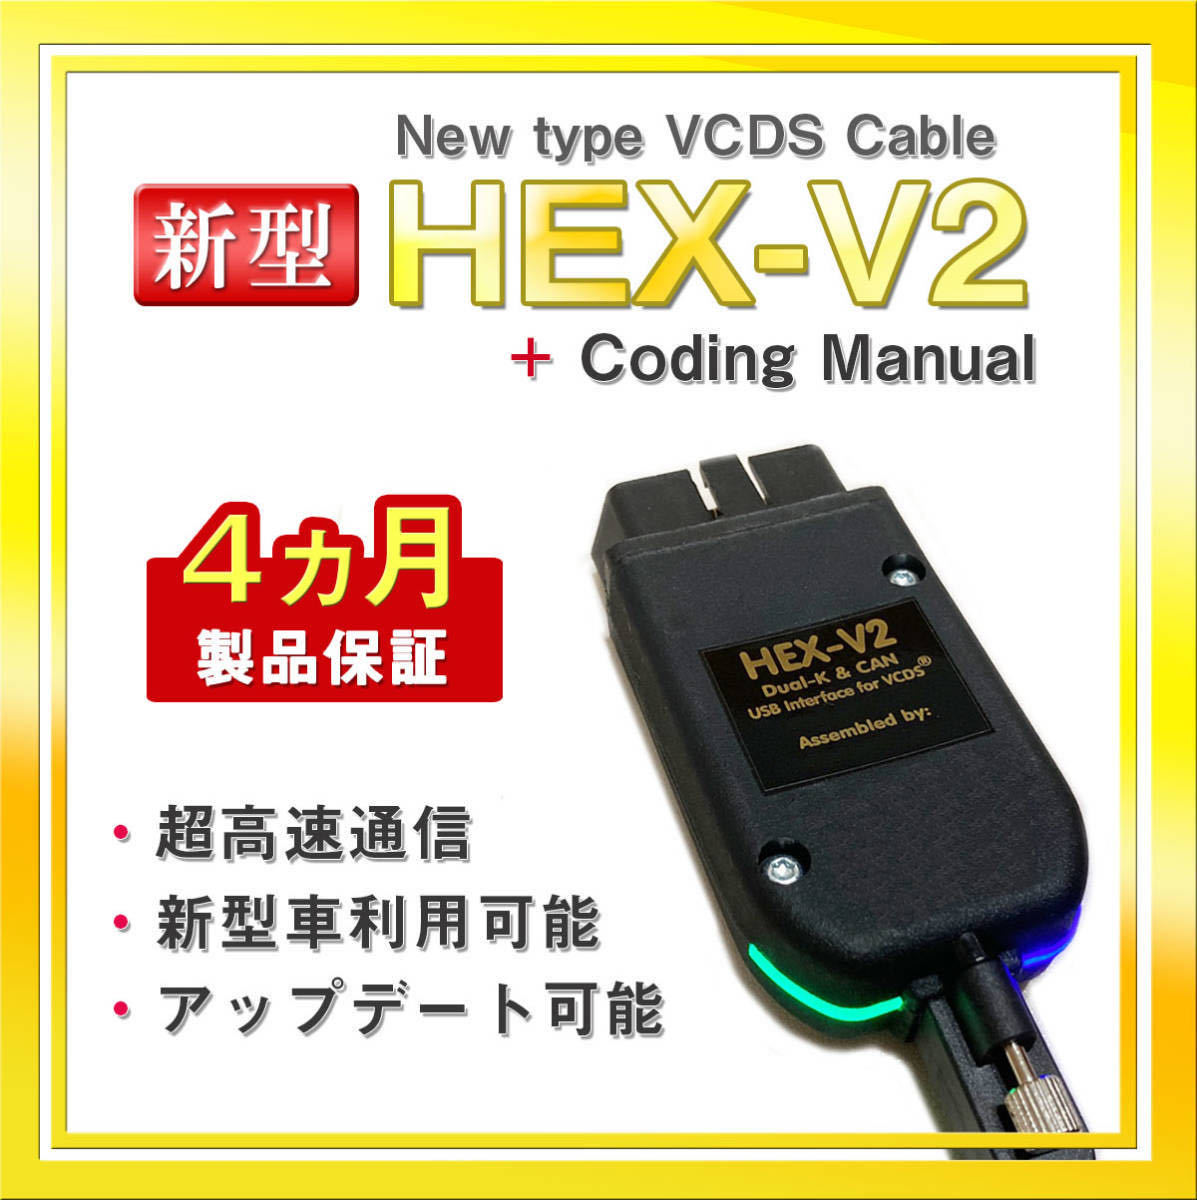 [* with guarantee ] recent model real V2 VCDS HEX-V2 interchangeable cable Audi Volkswagen Audi VW coding Golf 7 Passat A3 A4 etc. 